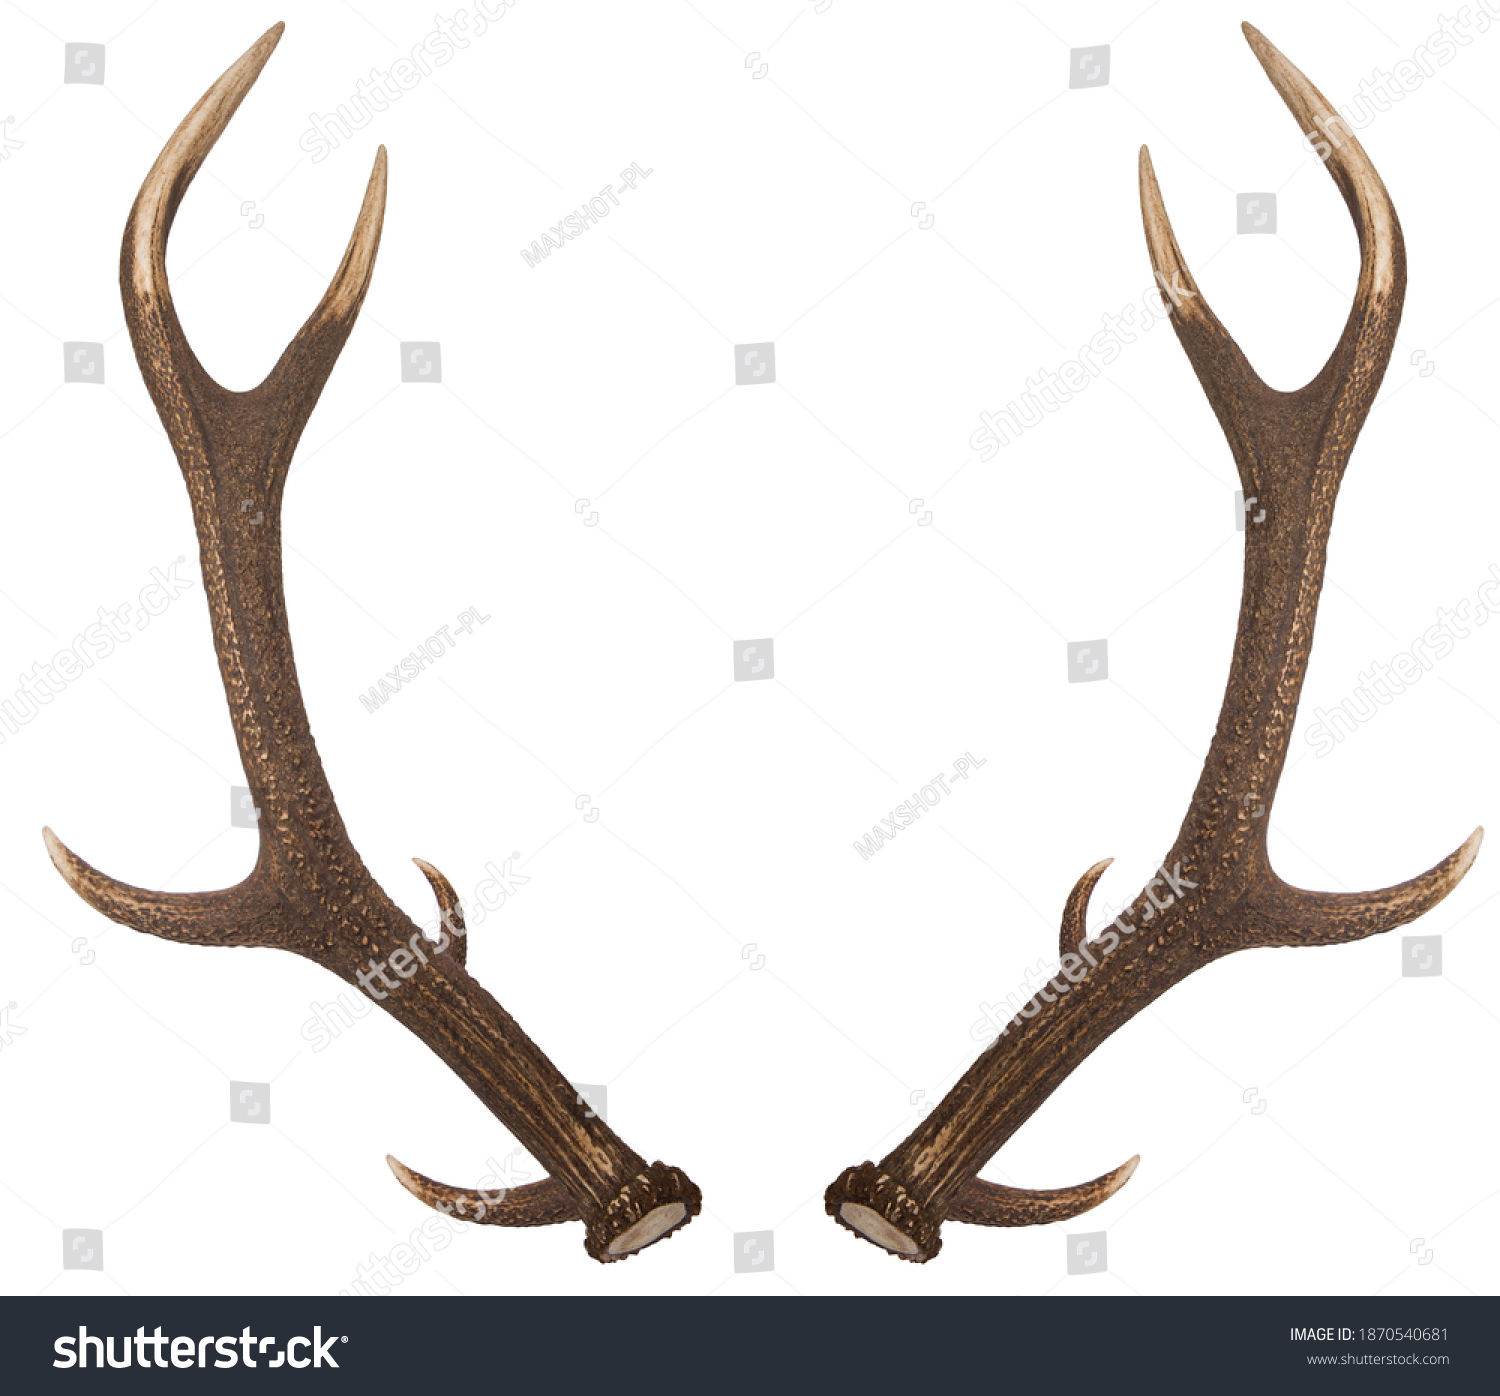 Pair of red deer antlers on a white background. Deer antlers. Isolatedon white background.  #1870540681